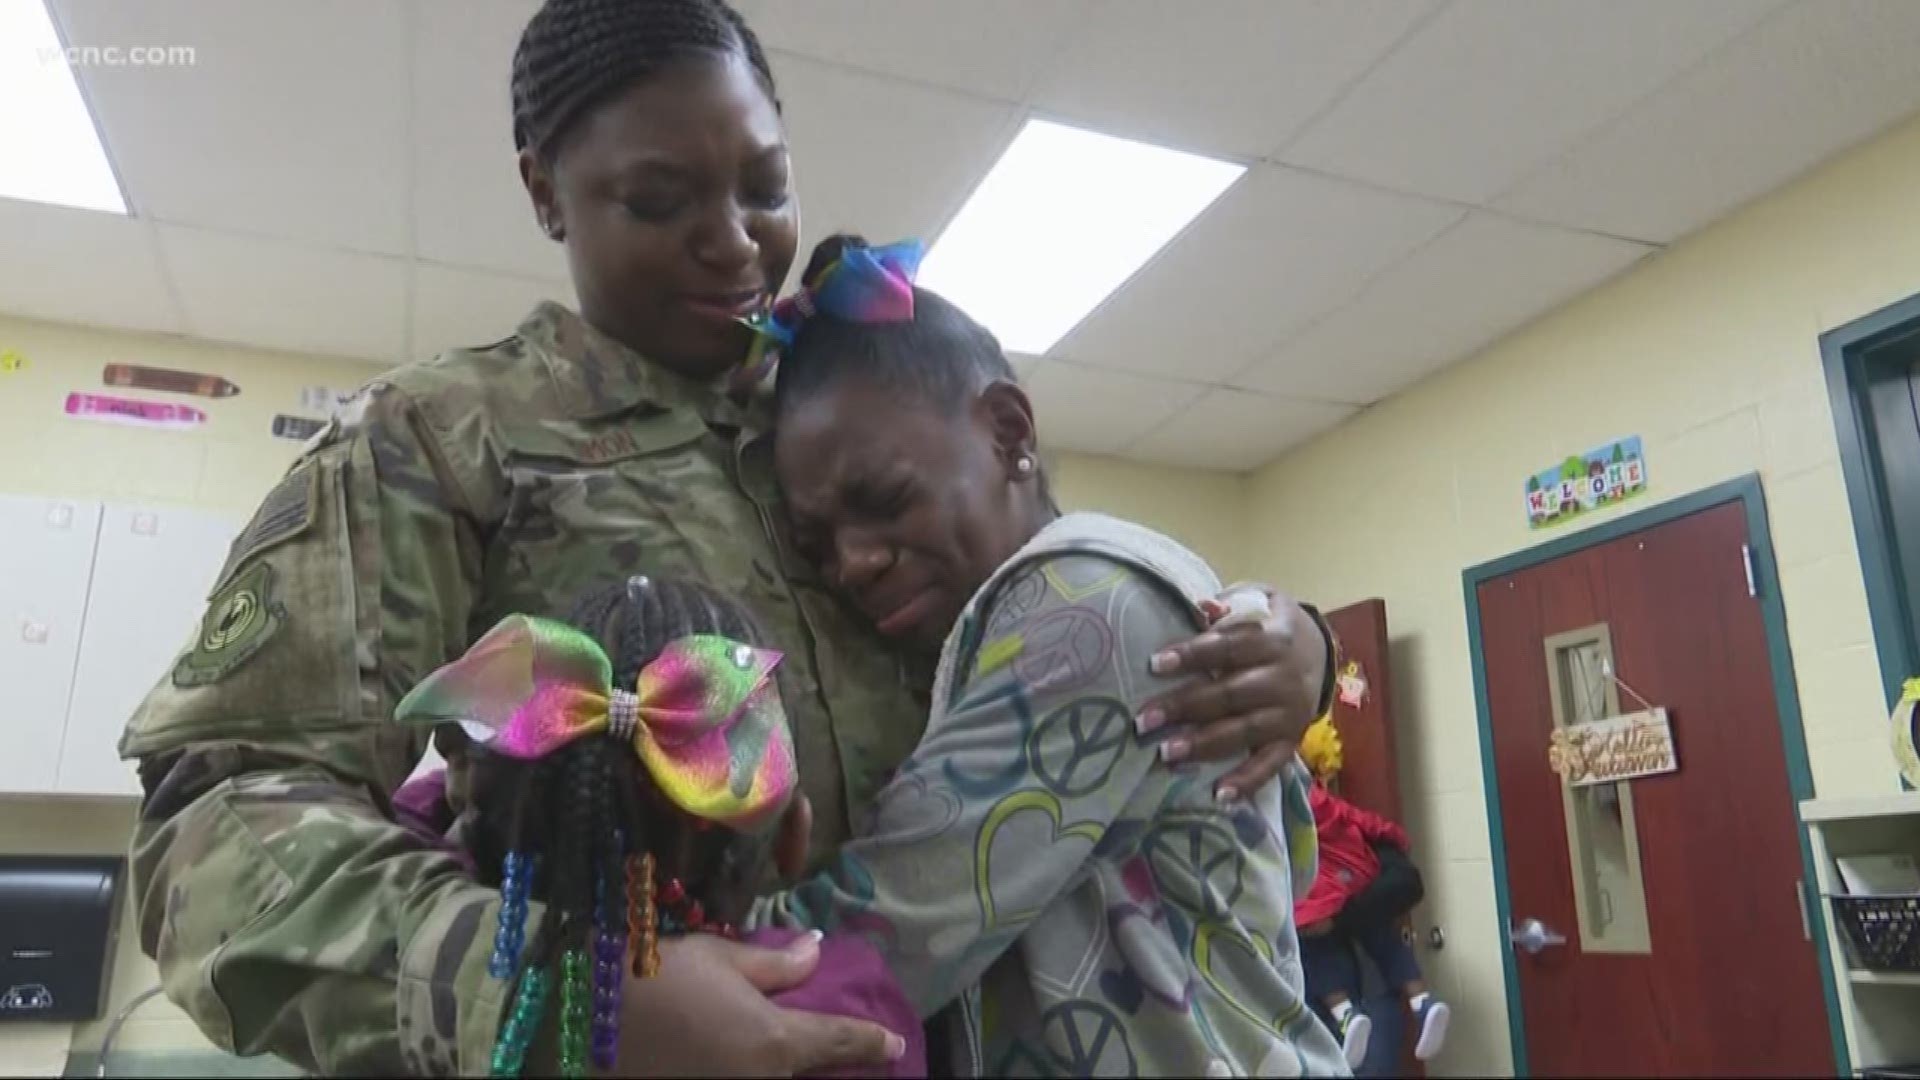 Jaquisha Simon has been deployed since the summer and came to surprise her baby girls right in time for the holidays.